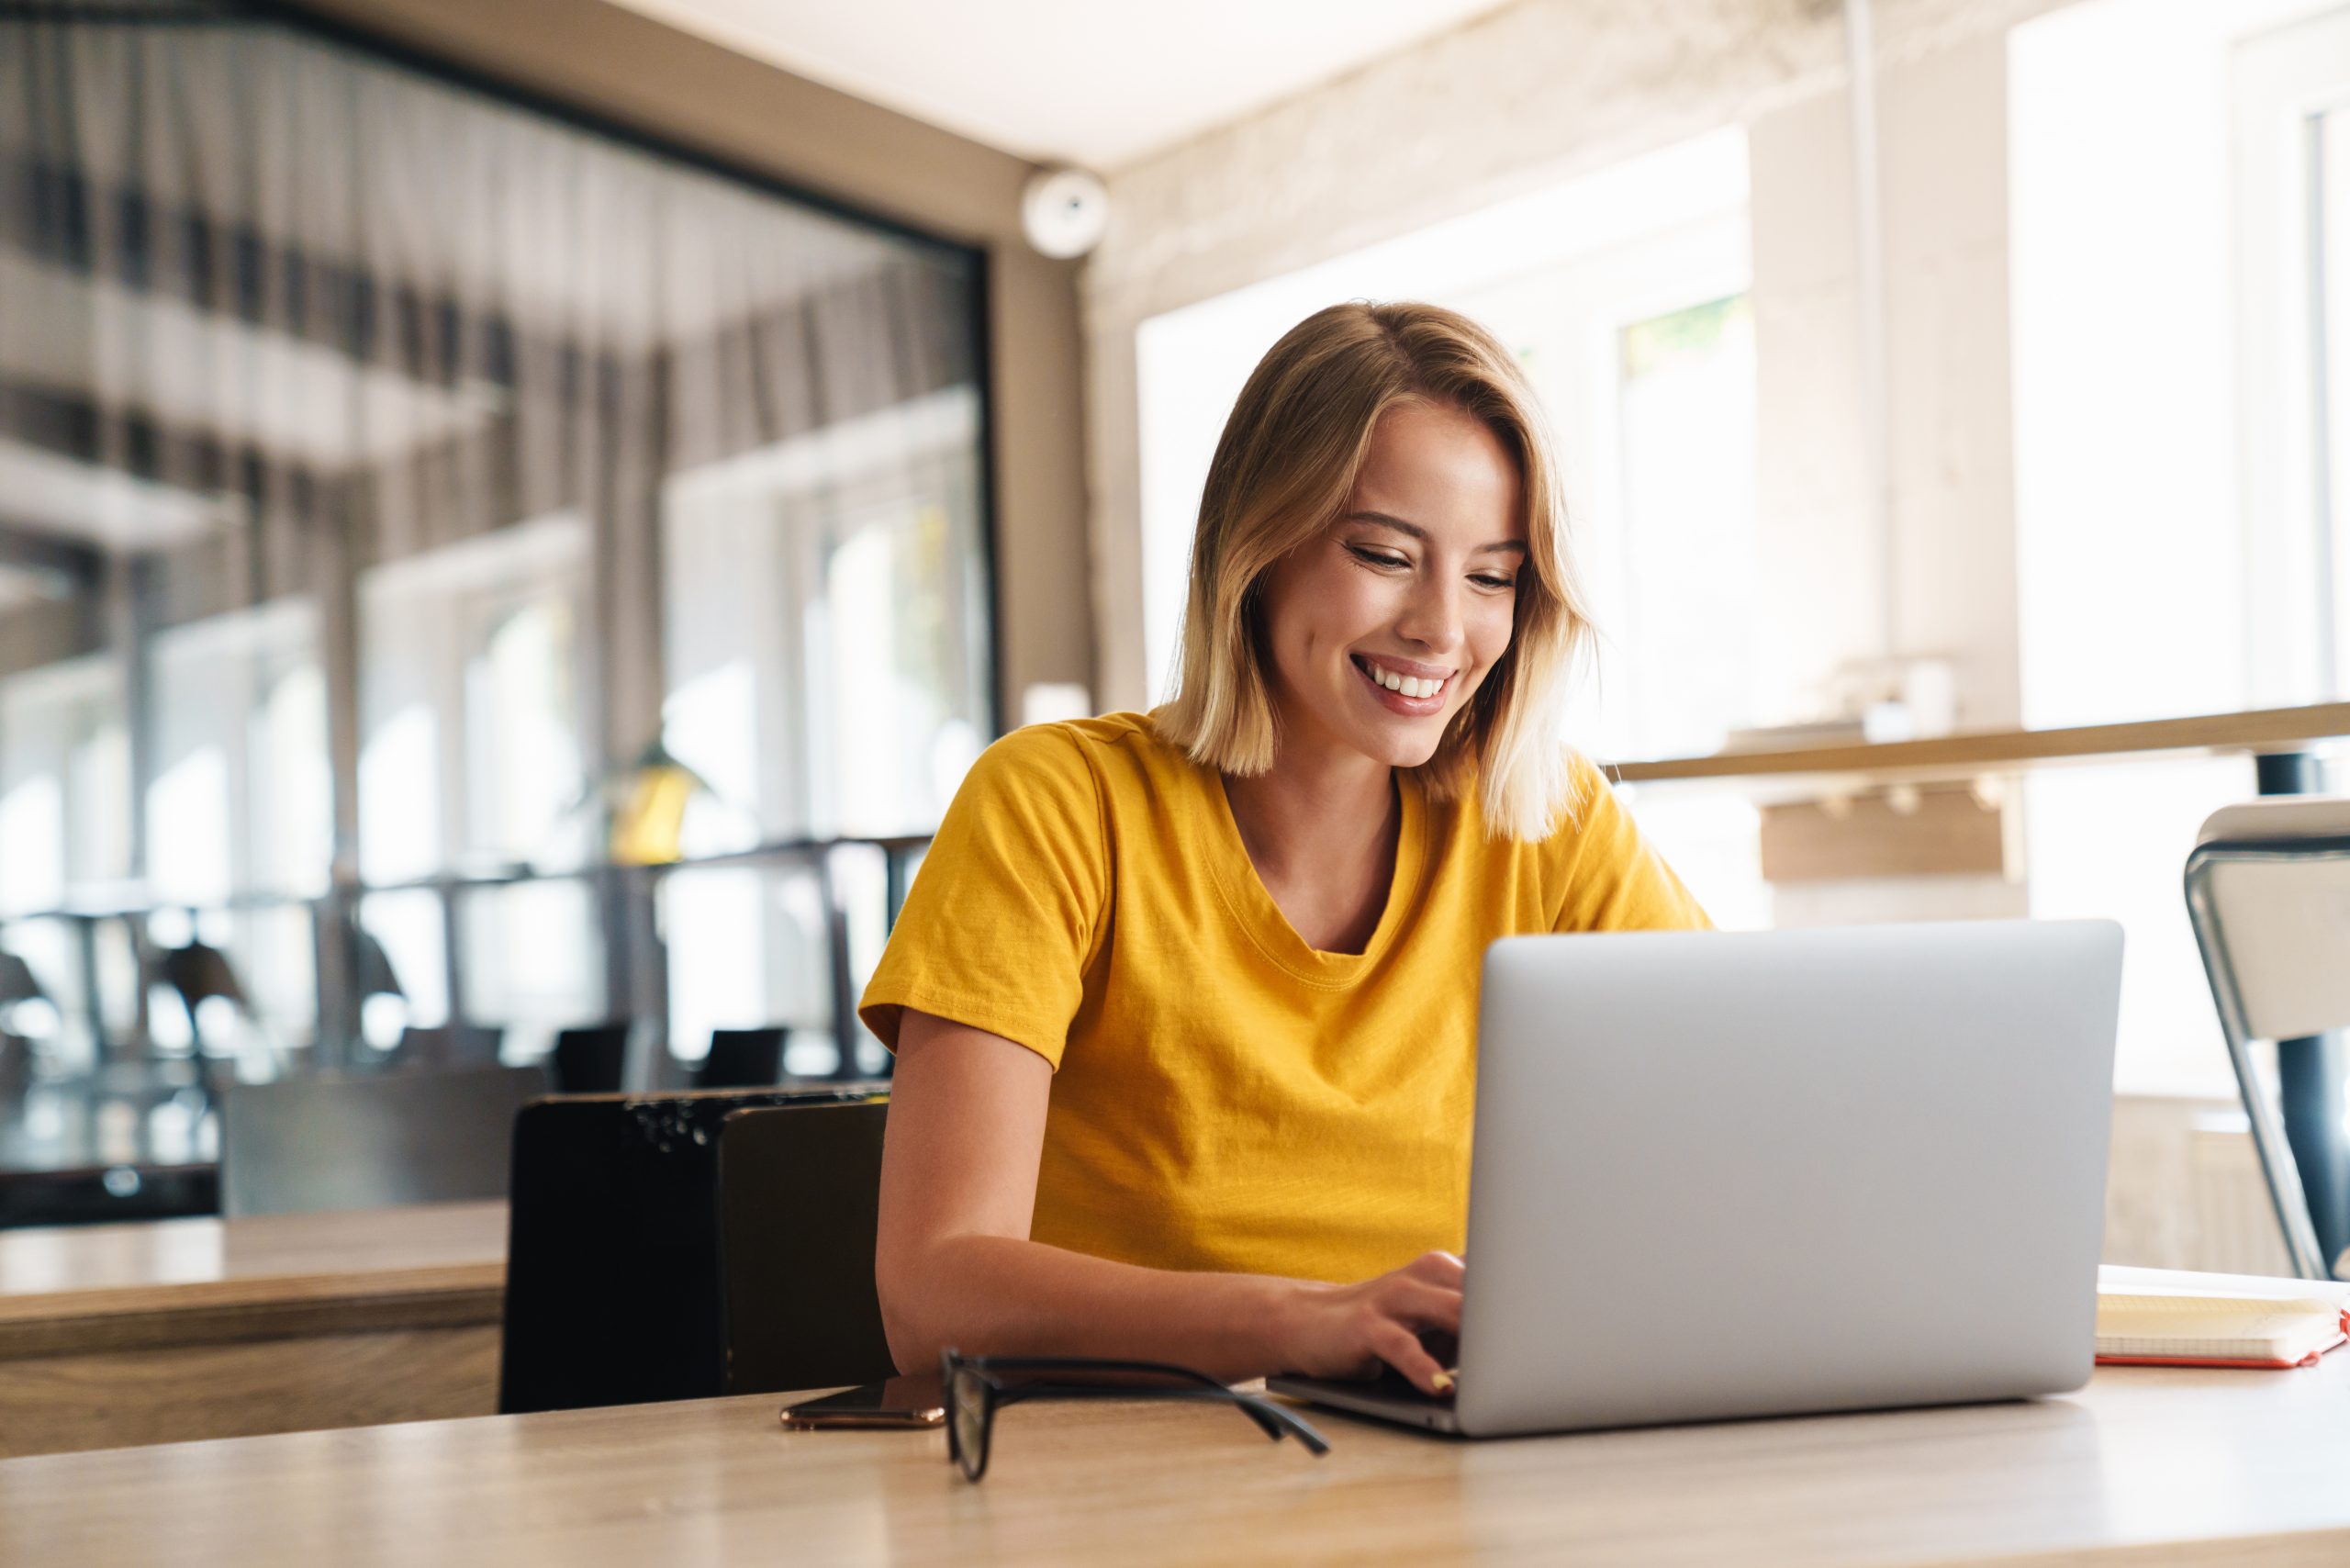 Photo of joyful nice woman using laptop and smiling while sitting and using a laptop